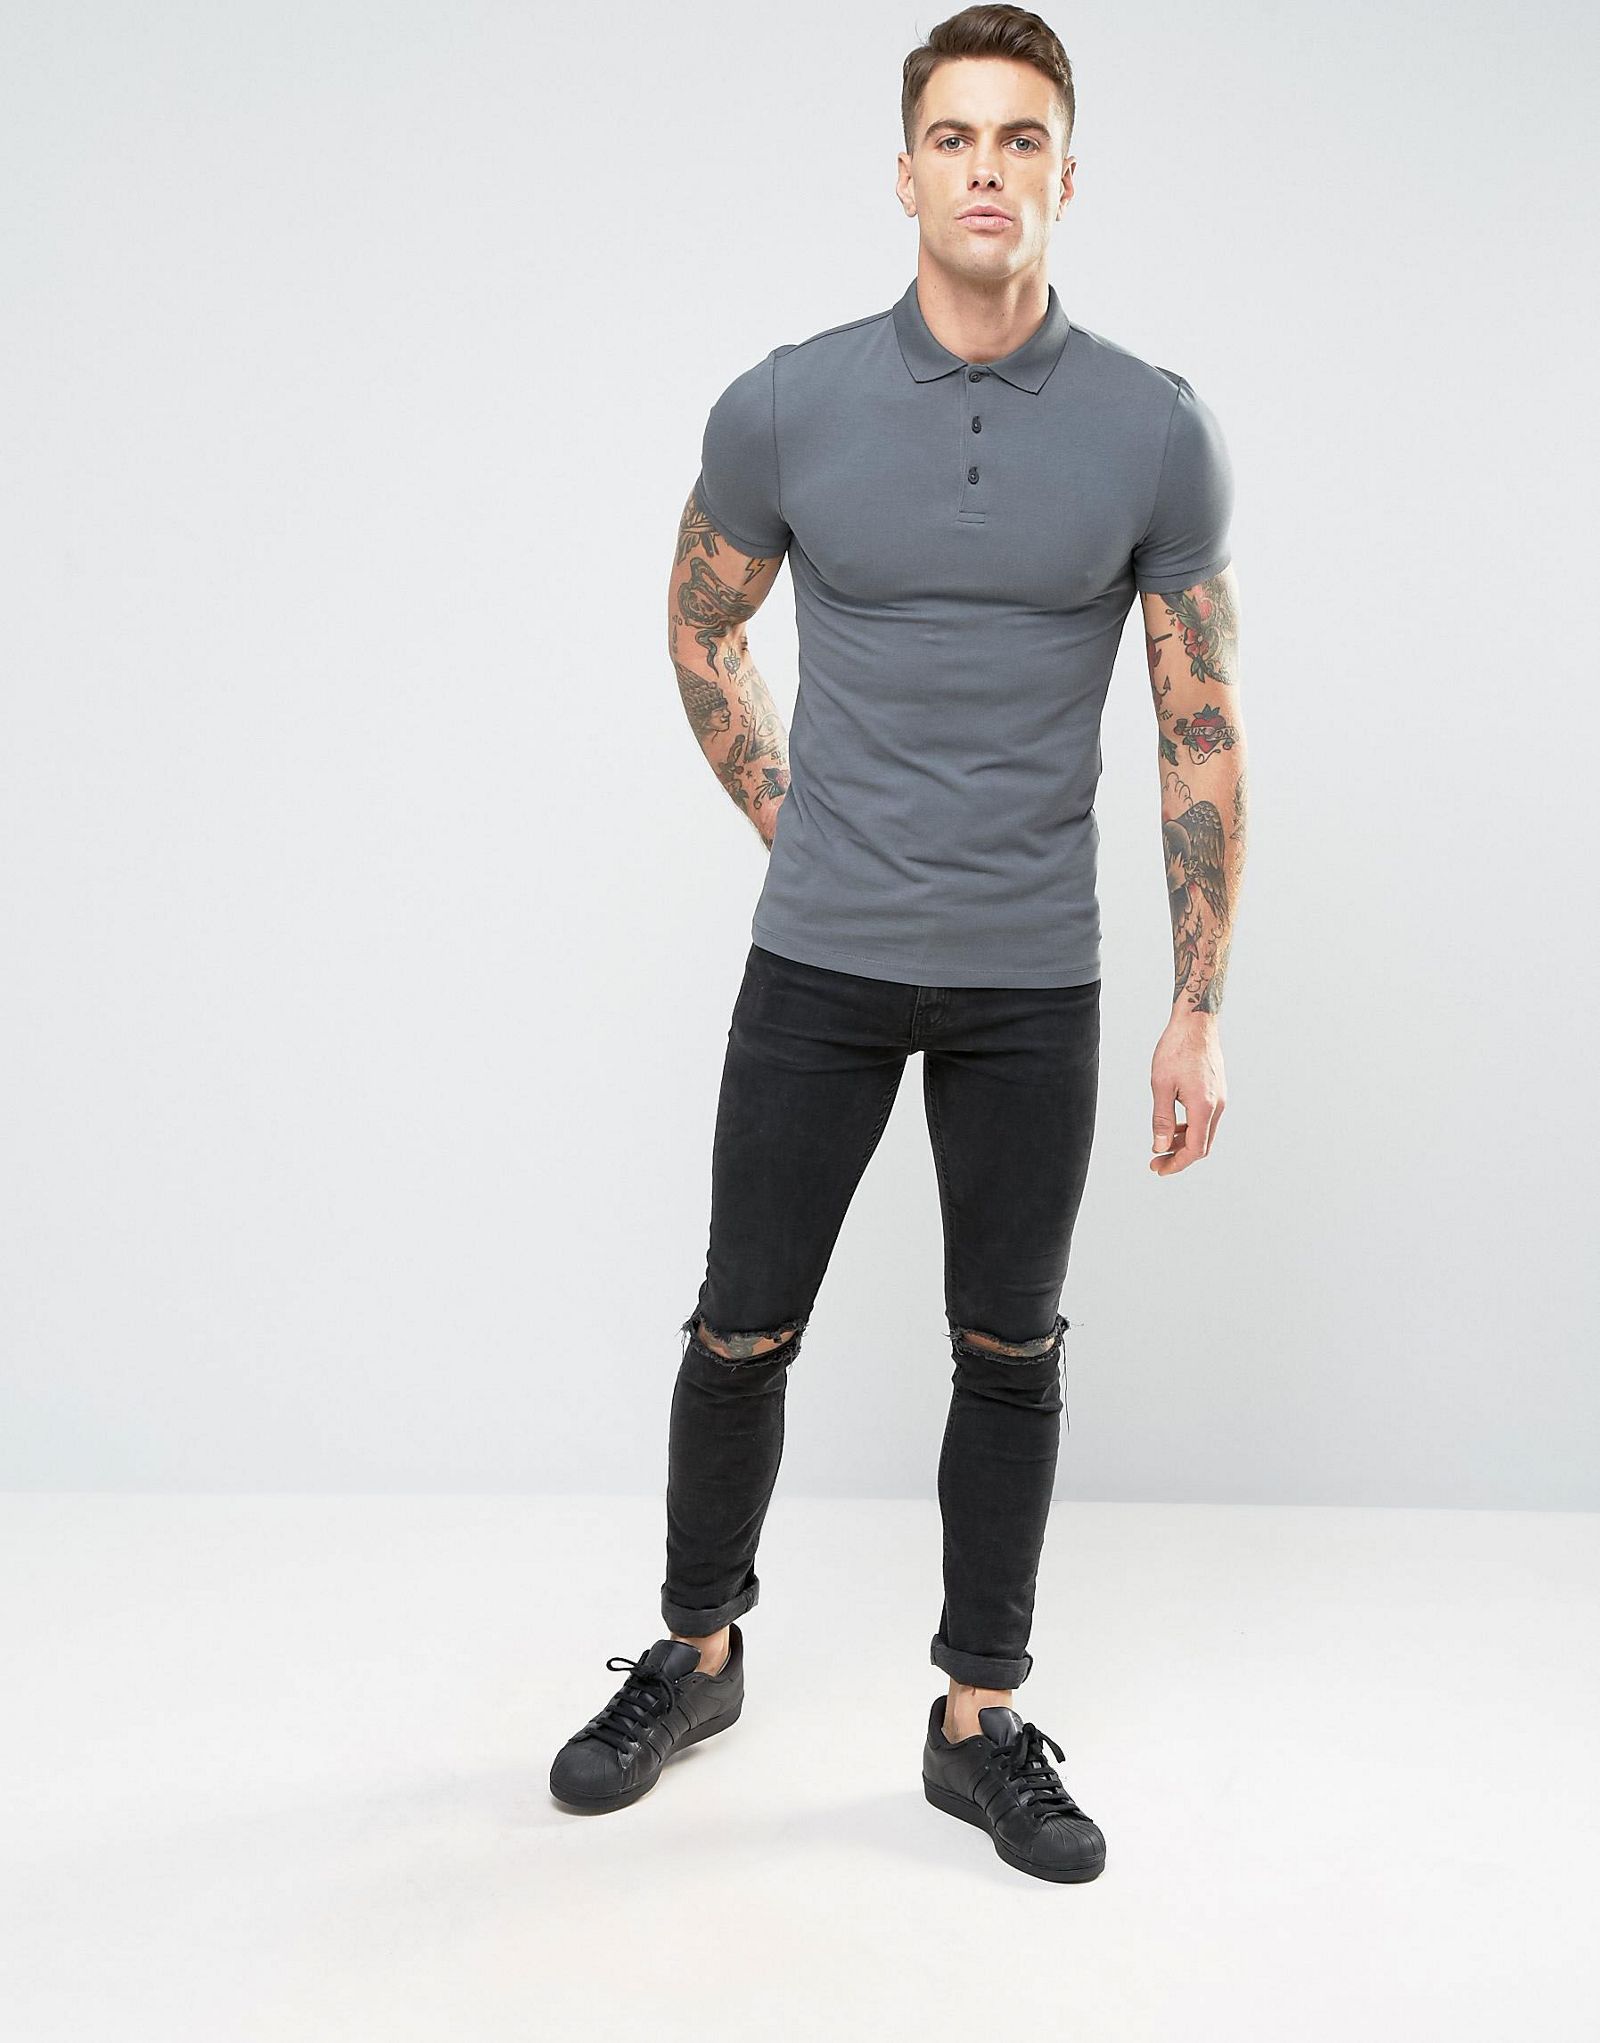 ASOS Extreme Muscle Polo Shirt In Grey